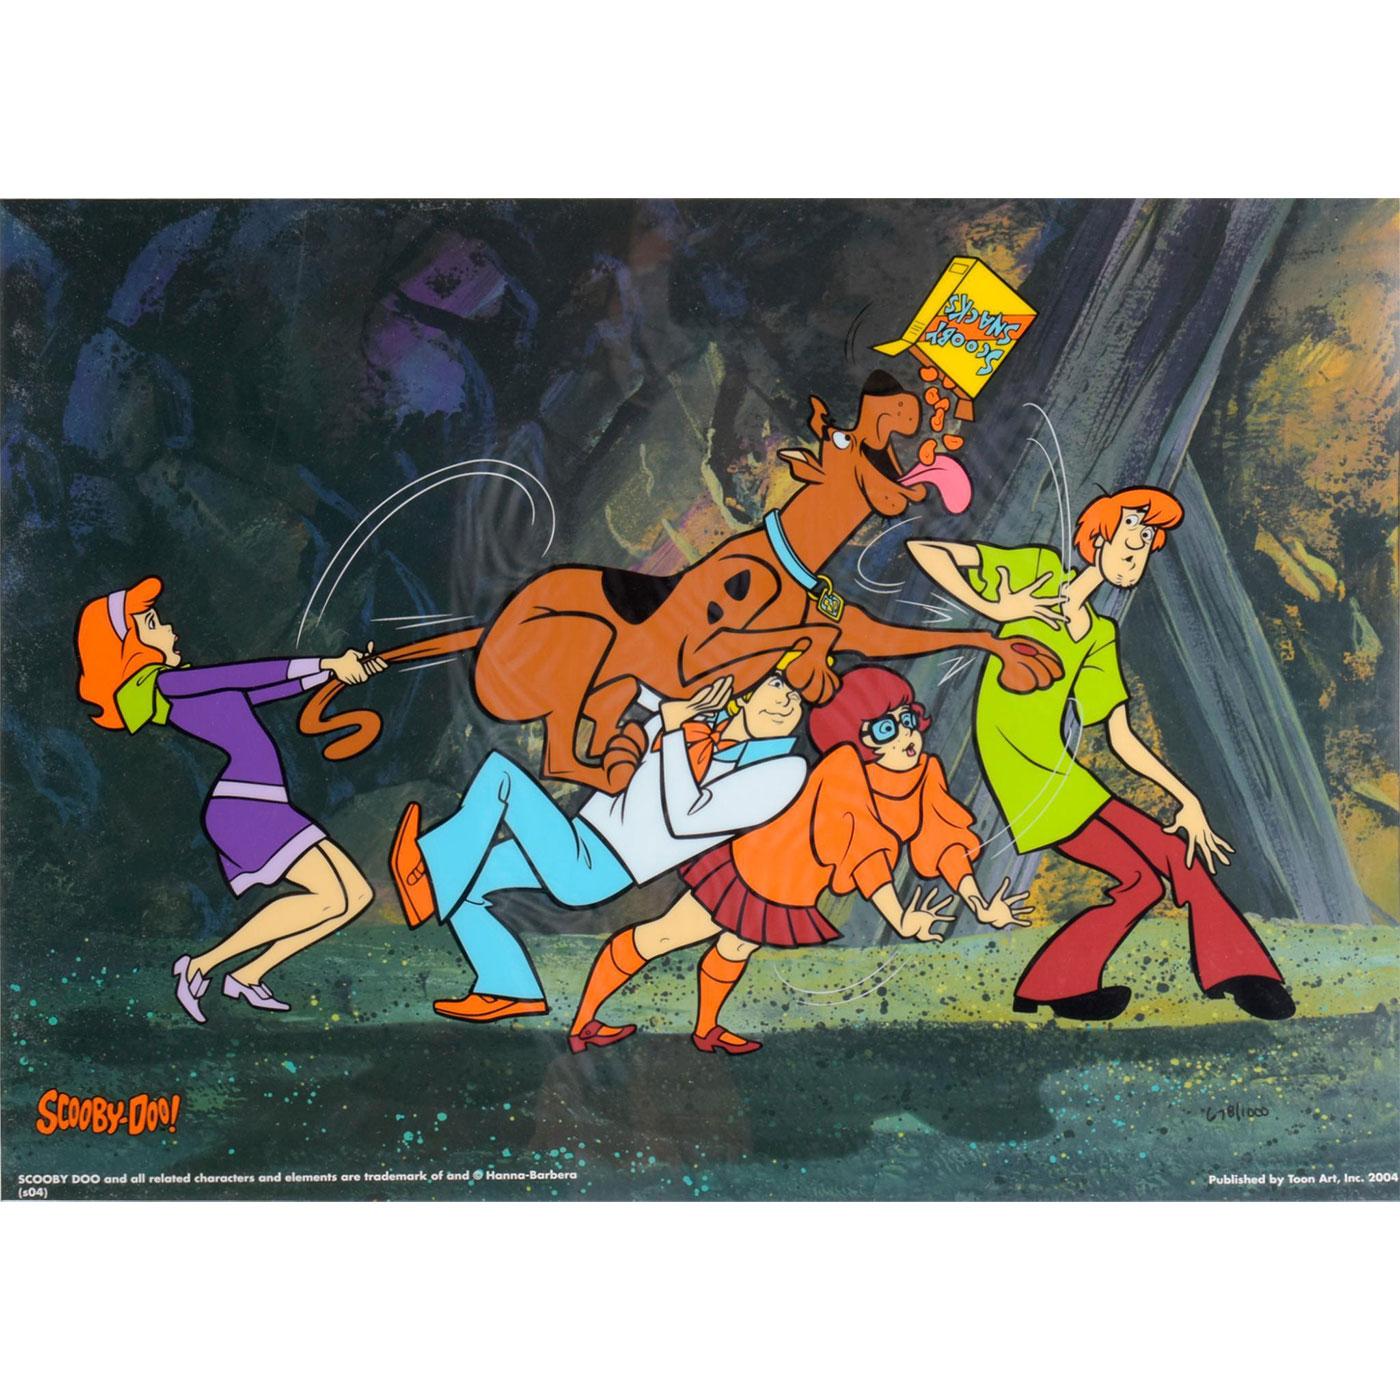 Vintage animation cel Scooby-Doo: Scooby Snacks | Lion and Unicorn